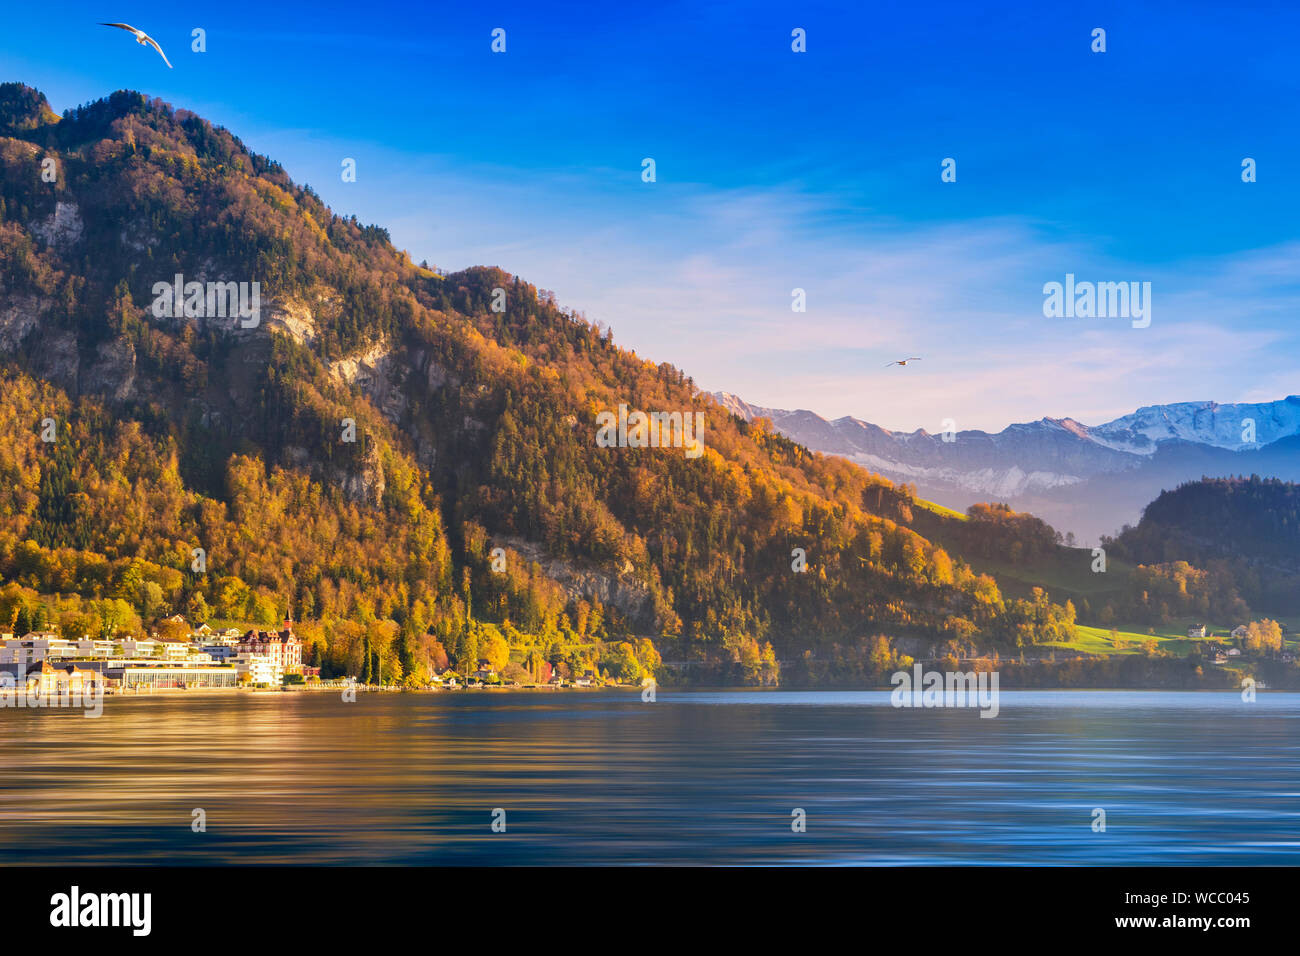 Scenic View Of Lake With Mountain In Background Stock Photo